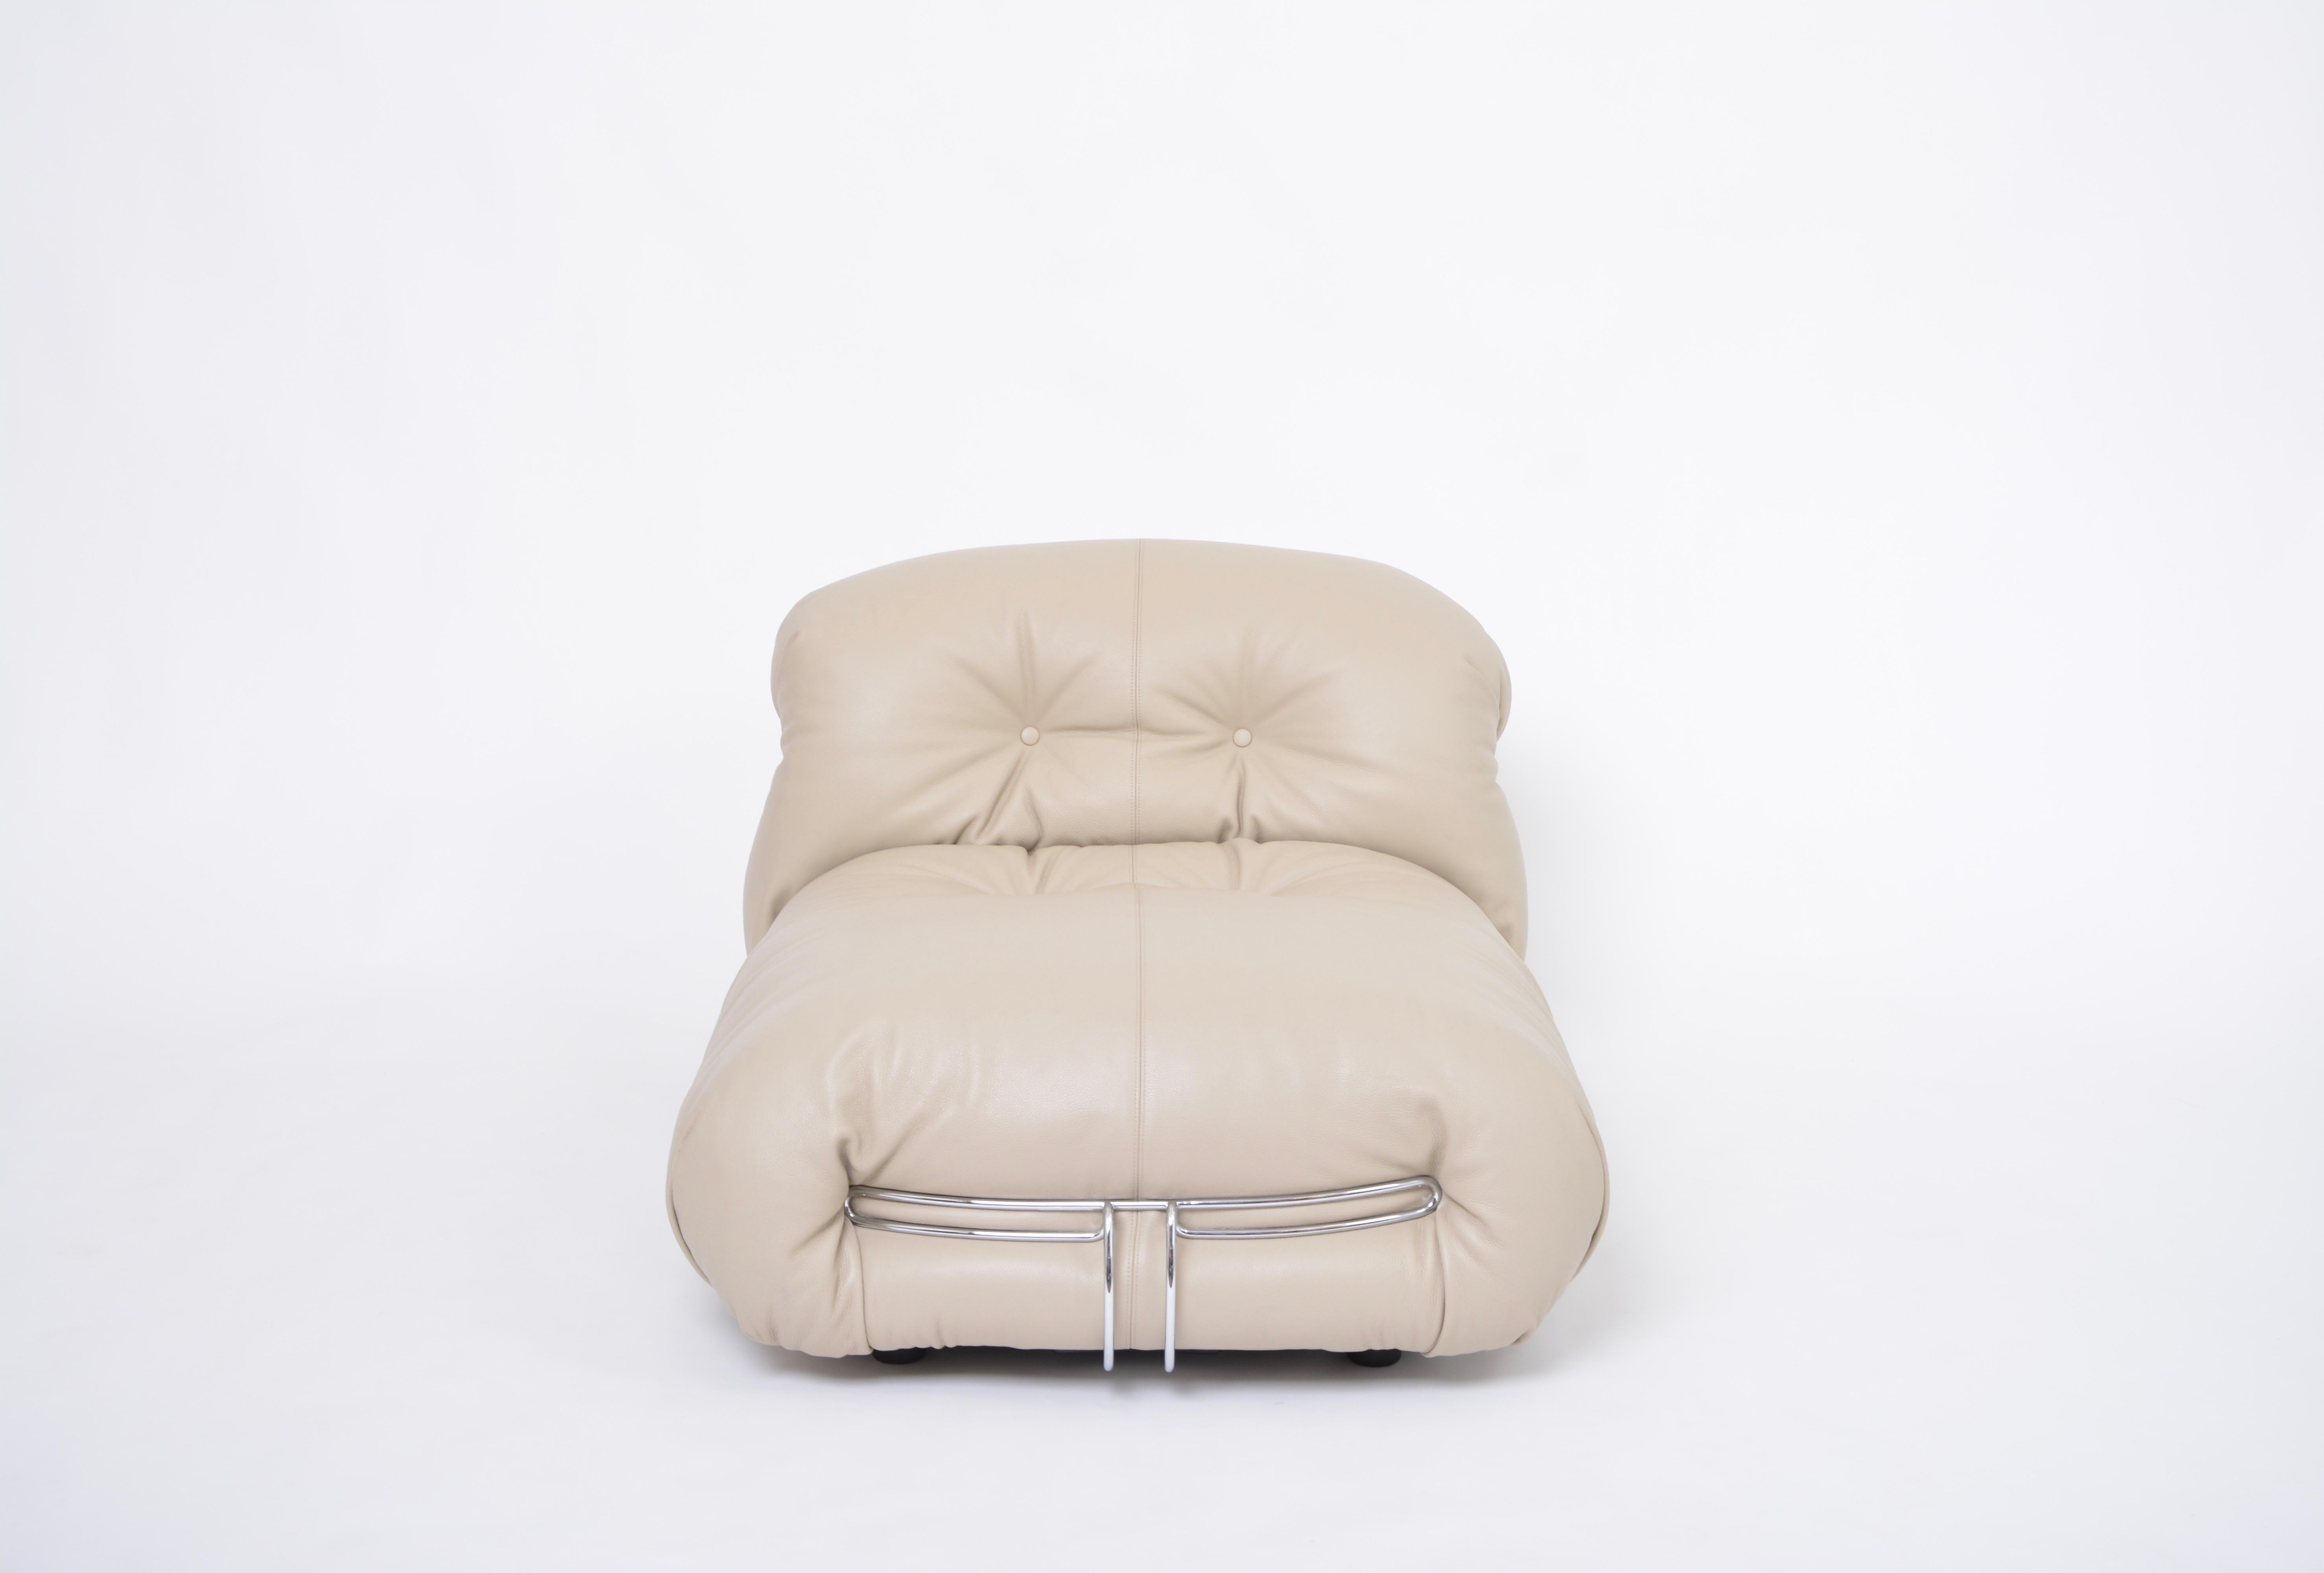 20th Century Afra & Tobia Scarpa 'Soriana' Chaise Lounge Chair in grey leather For Sale